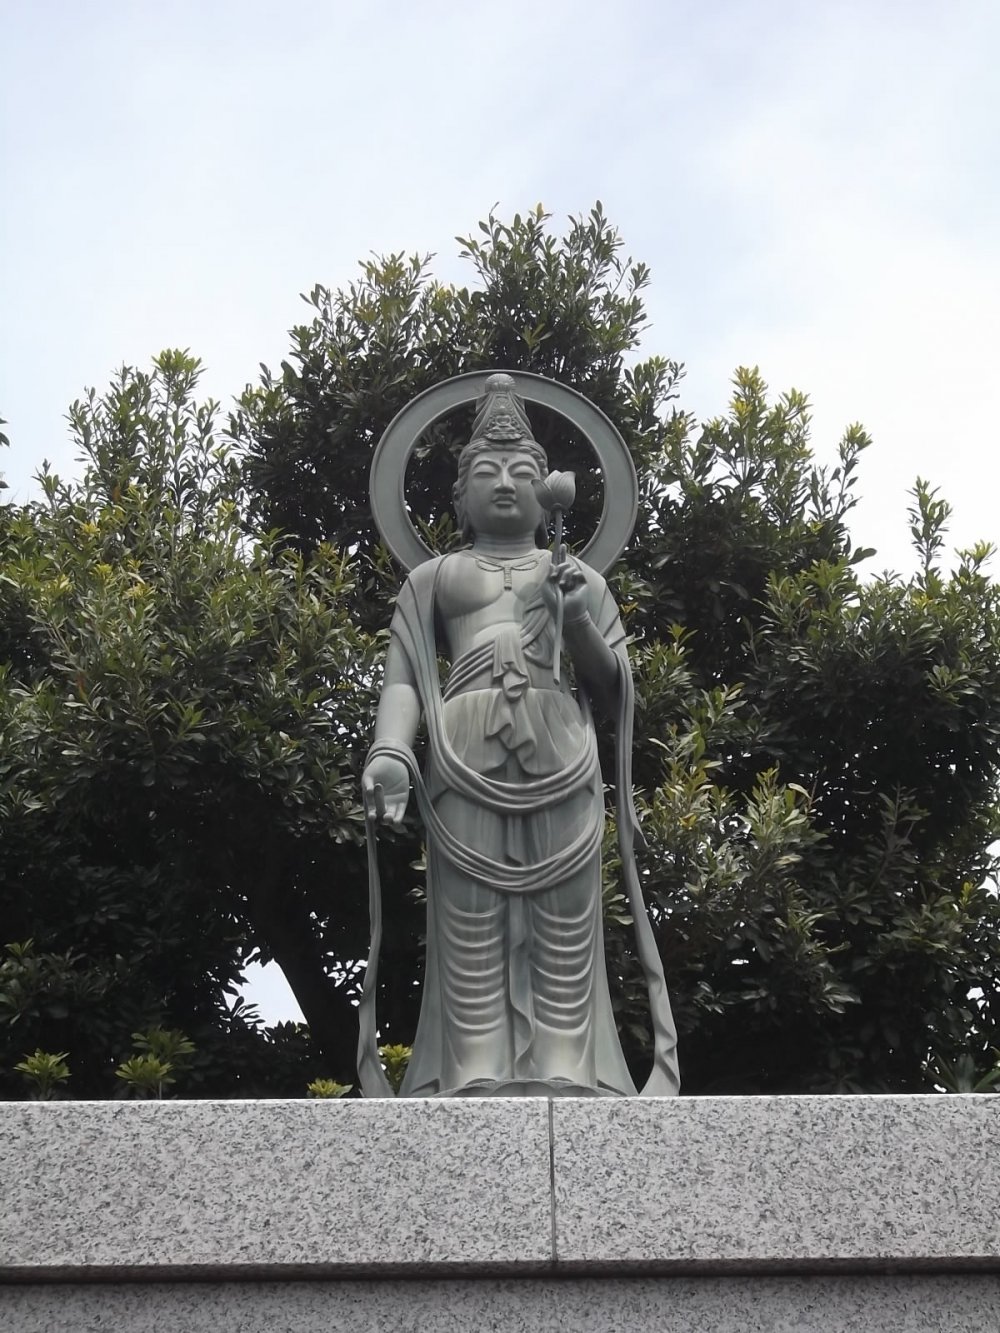 A Buddhist statue in the graveyard